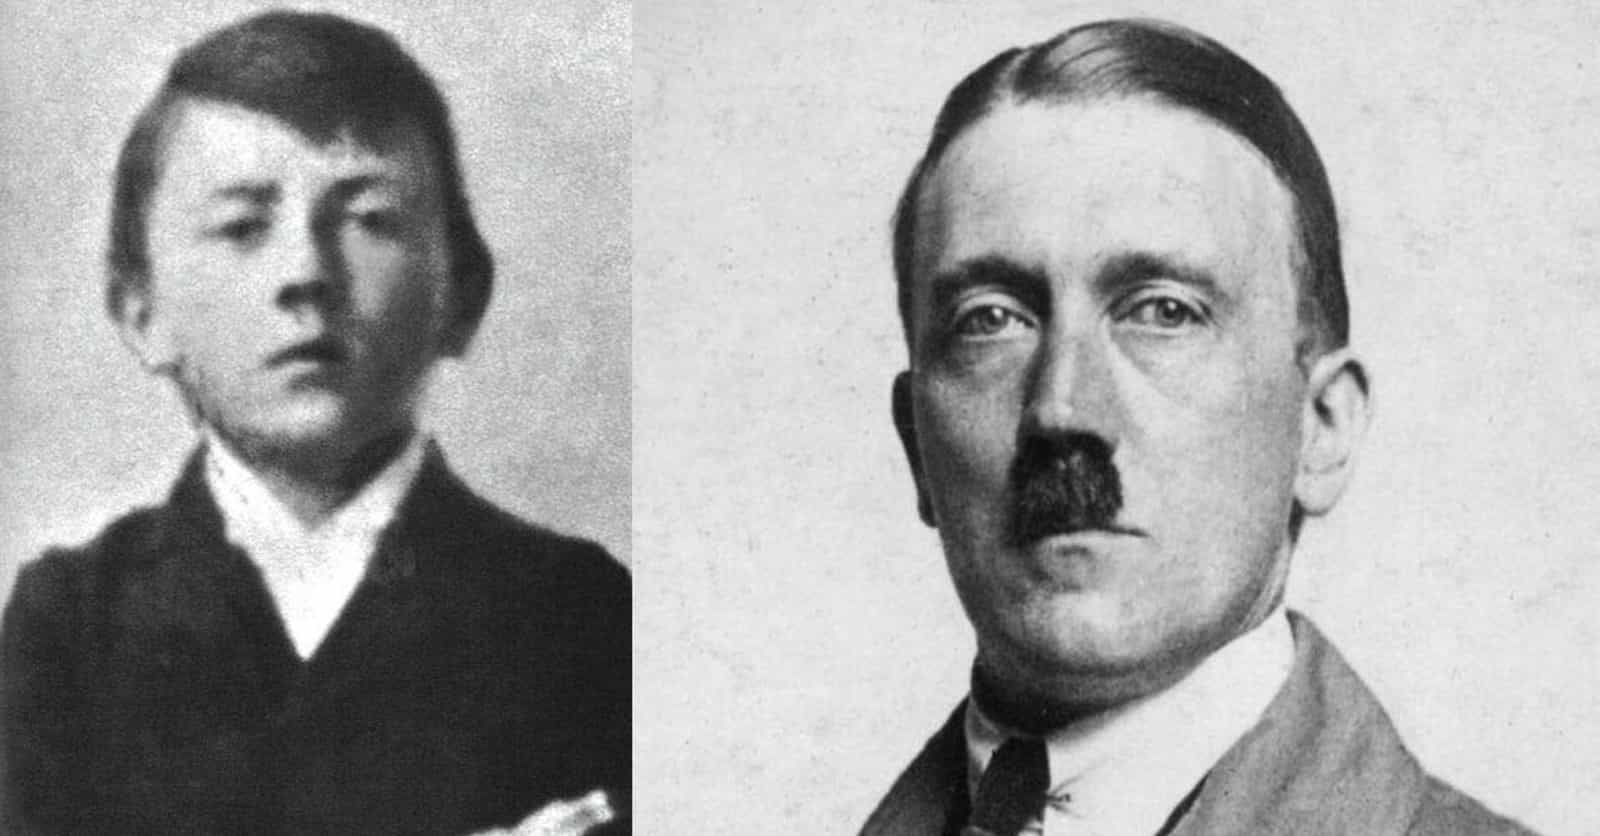 Everything You Never Knew About Hitler's Childhood